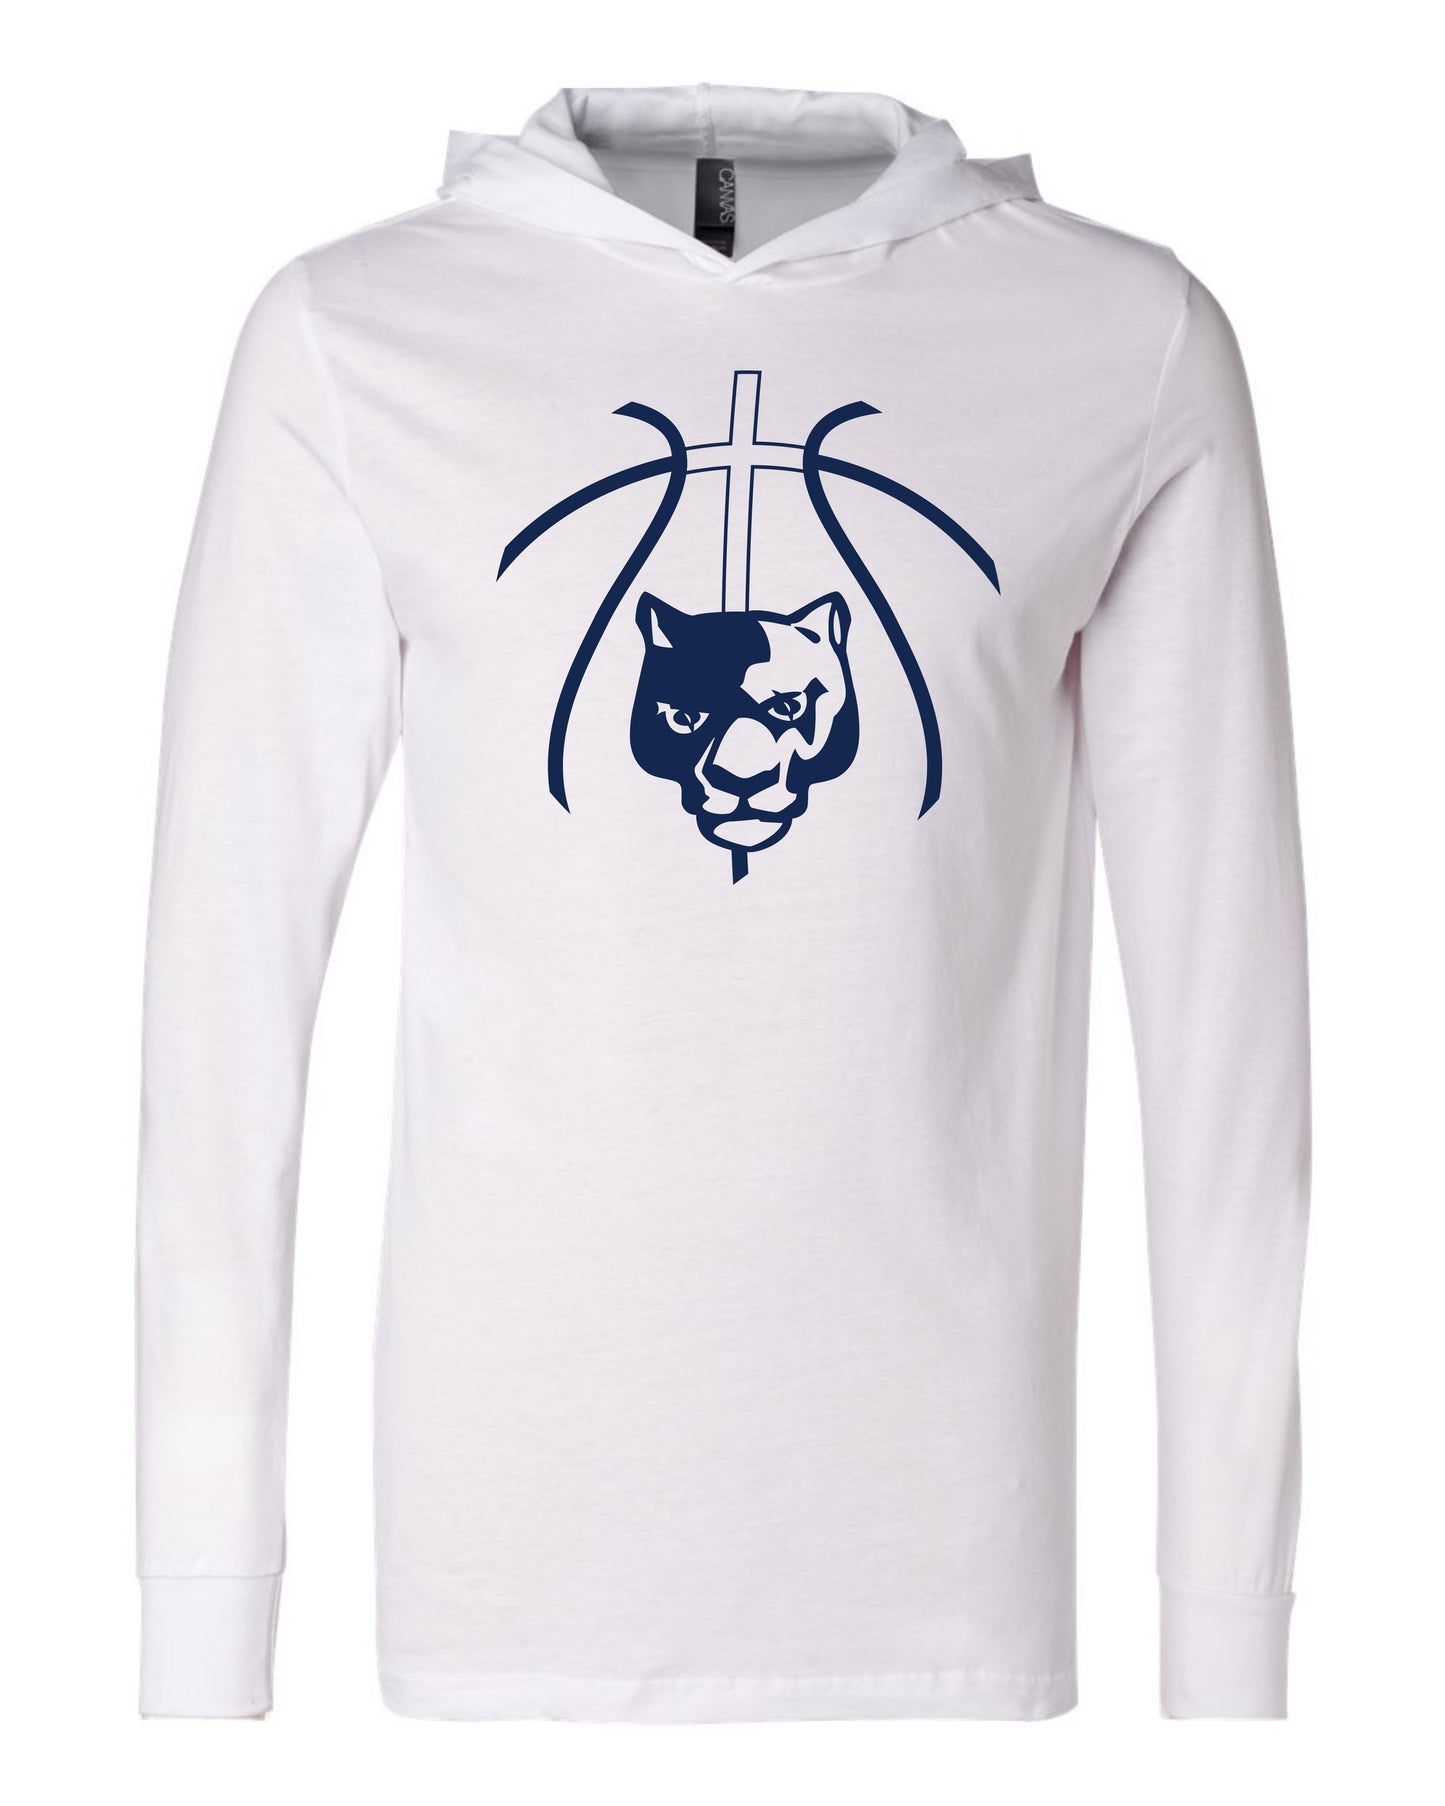 Panther Head Cross Ball - Adult Hooded Long Sleeve